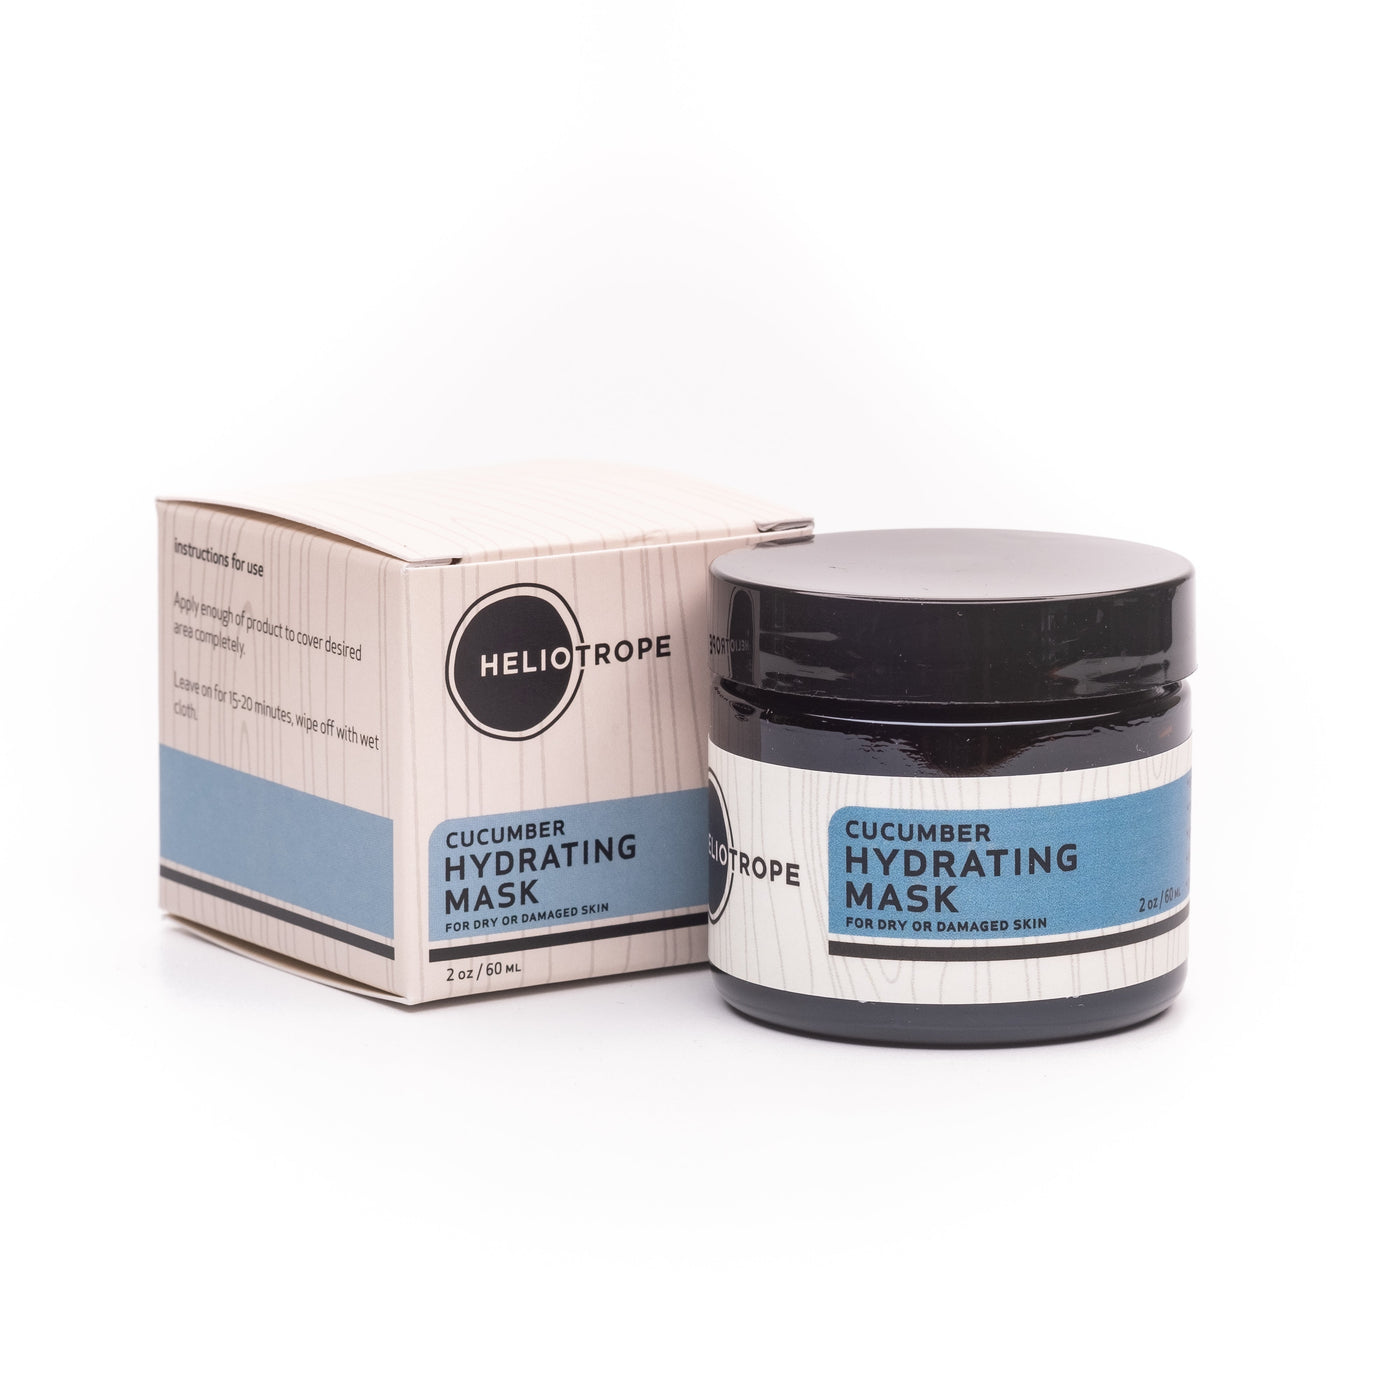 Cucumber Hydrating Mask by Heliotrope San Francisco